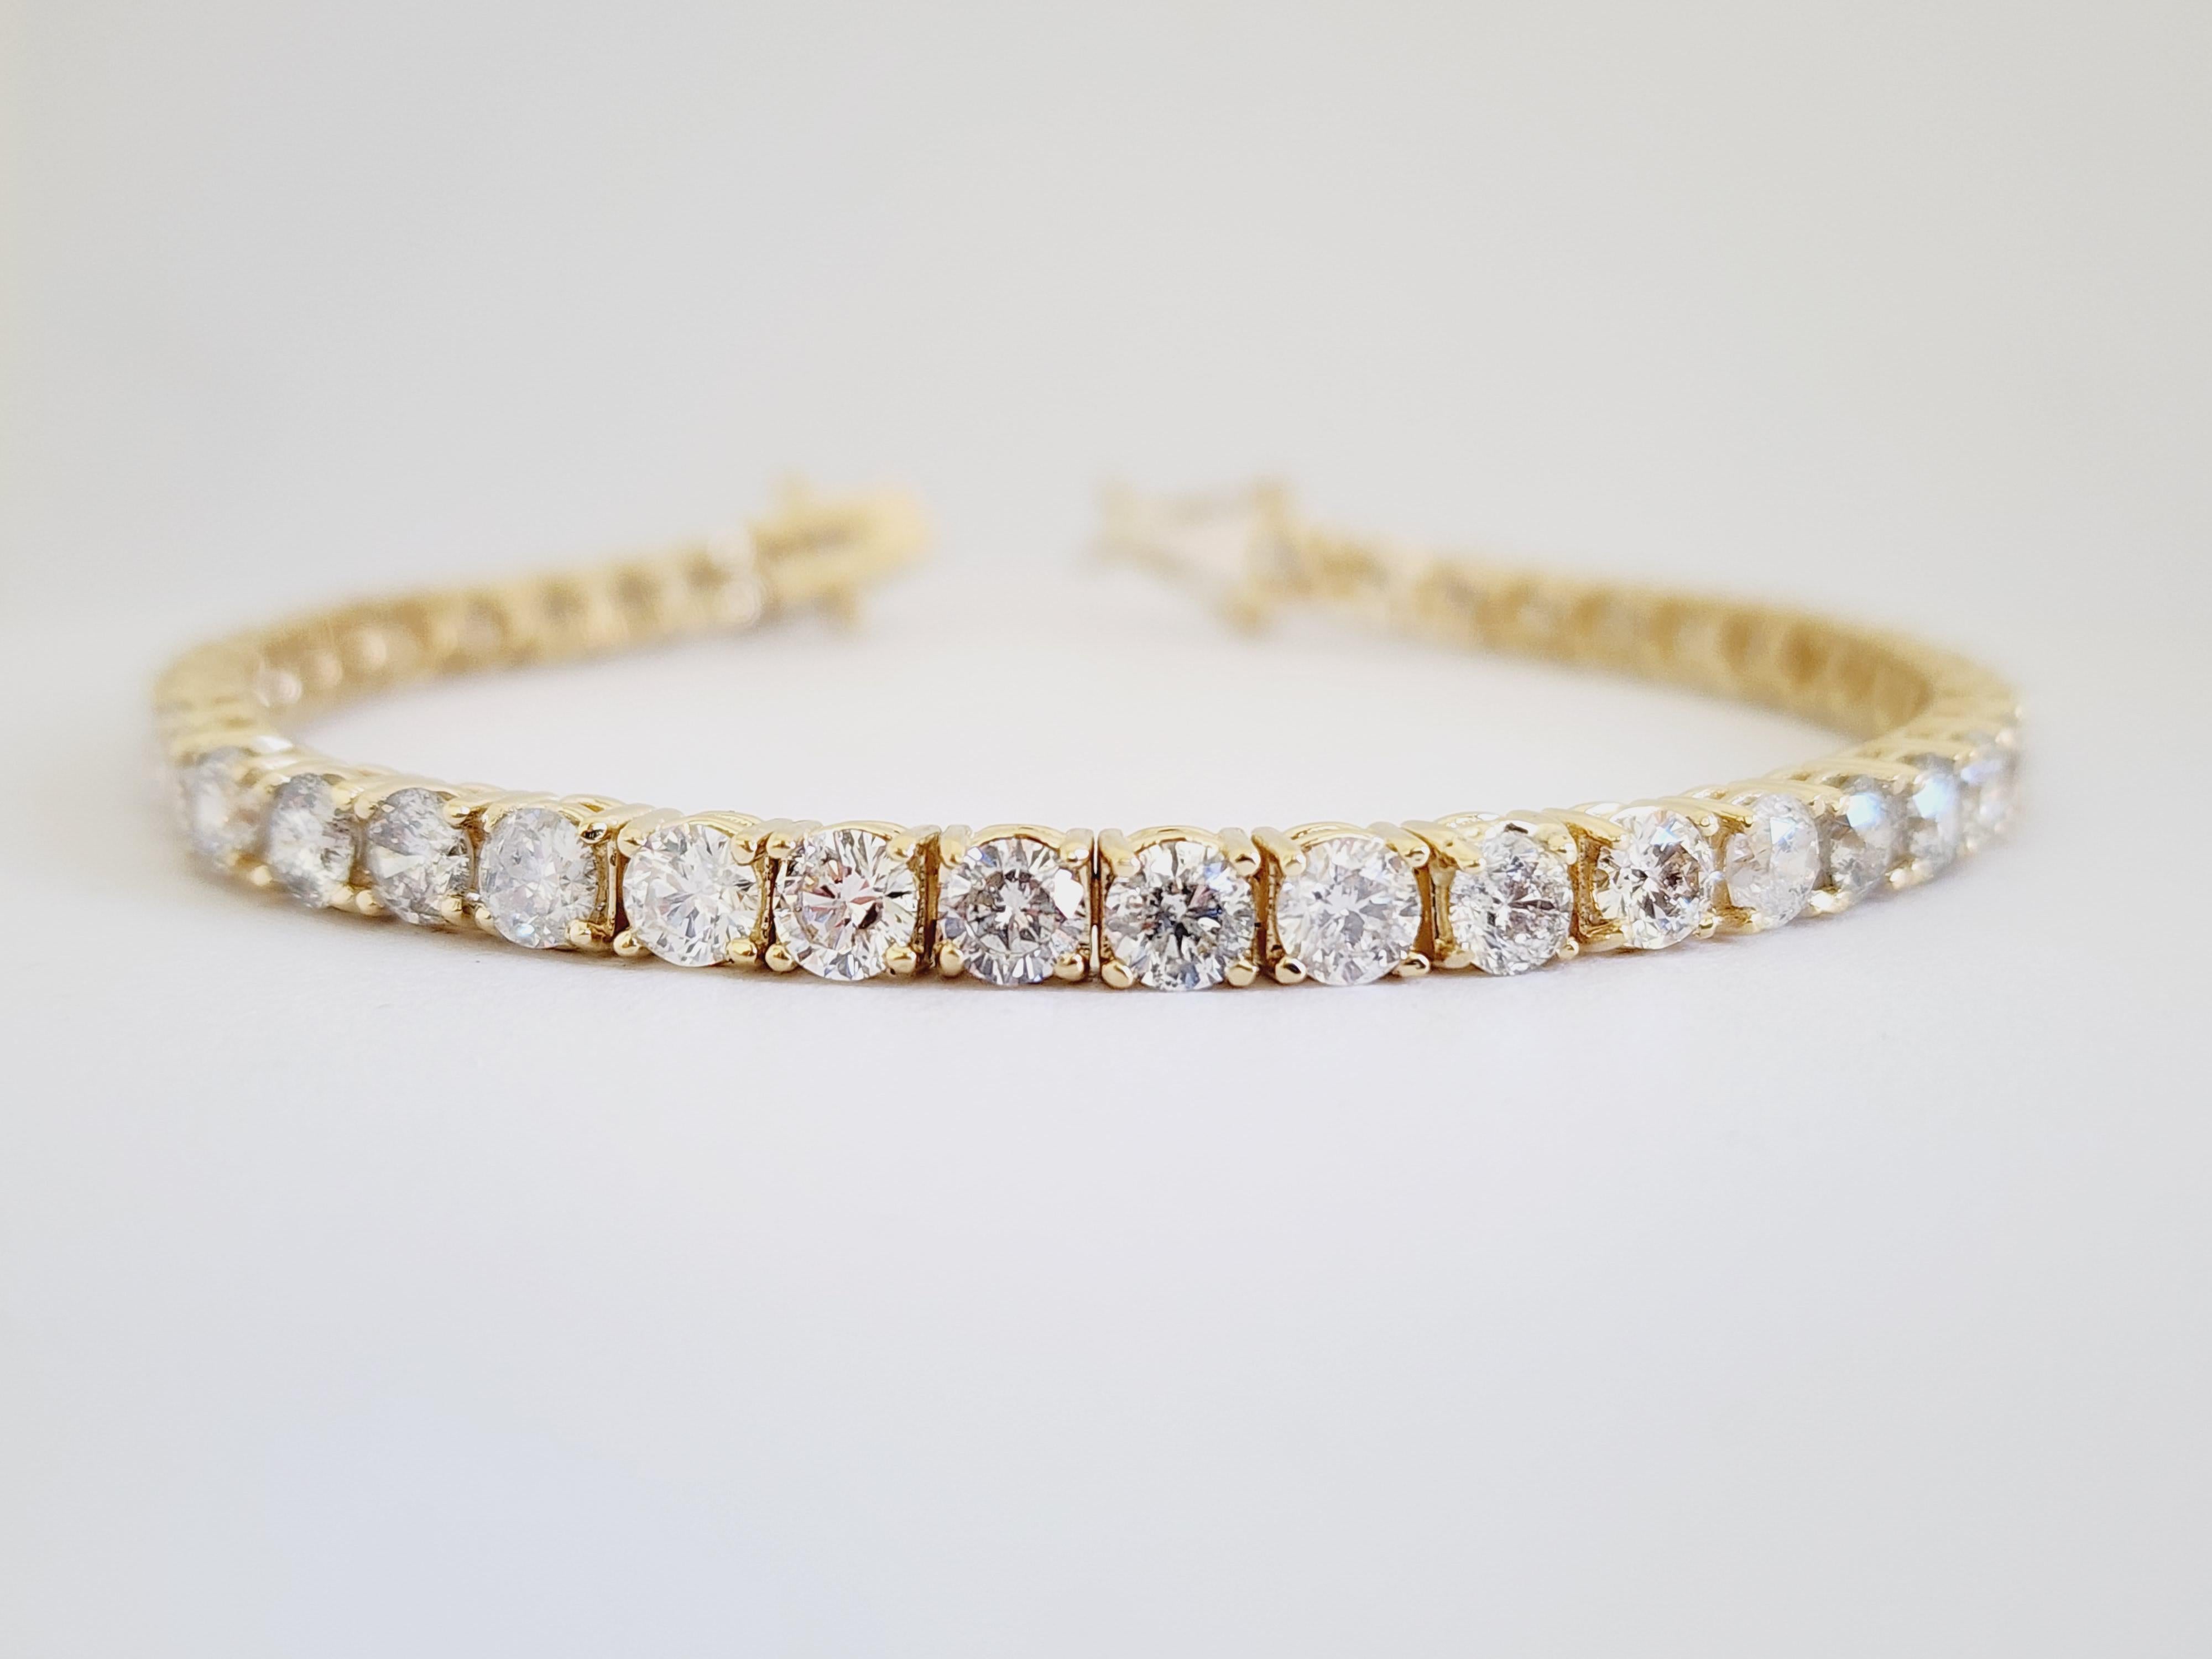 9.75 Carat Natural diamonds tennis bracelet round-brilliant cut  14k yellow gold. 
7 inch. Average Color F-G, Clarity SI-I. 3.9 mm wide. Very Shiny.

*Free shipping within the US*